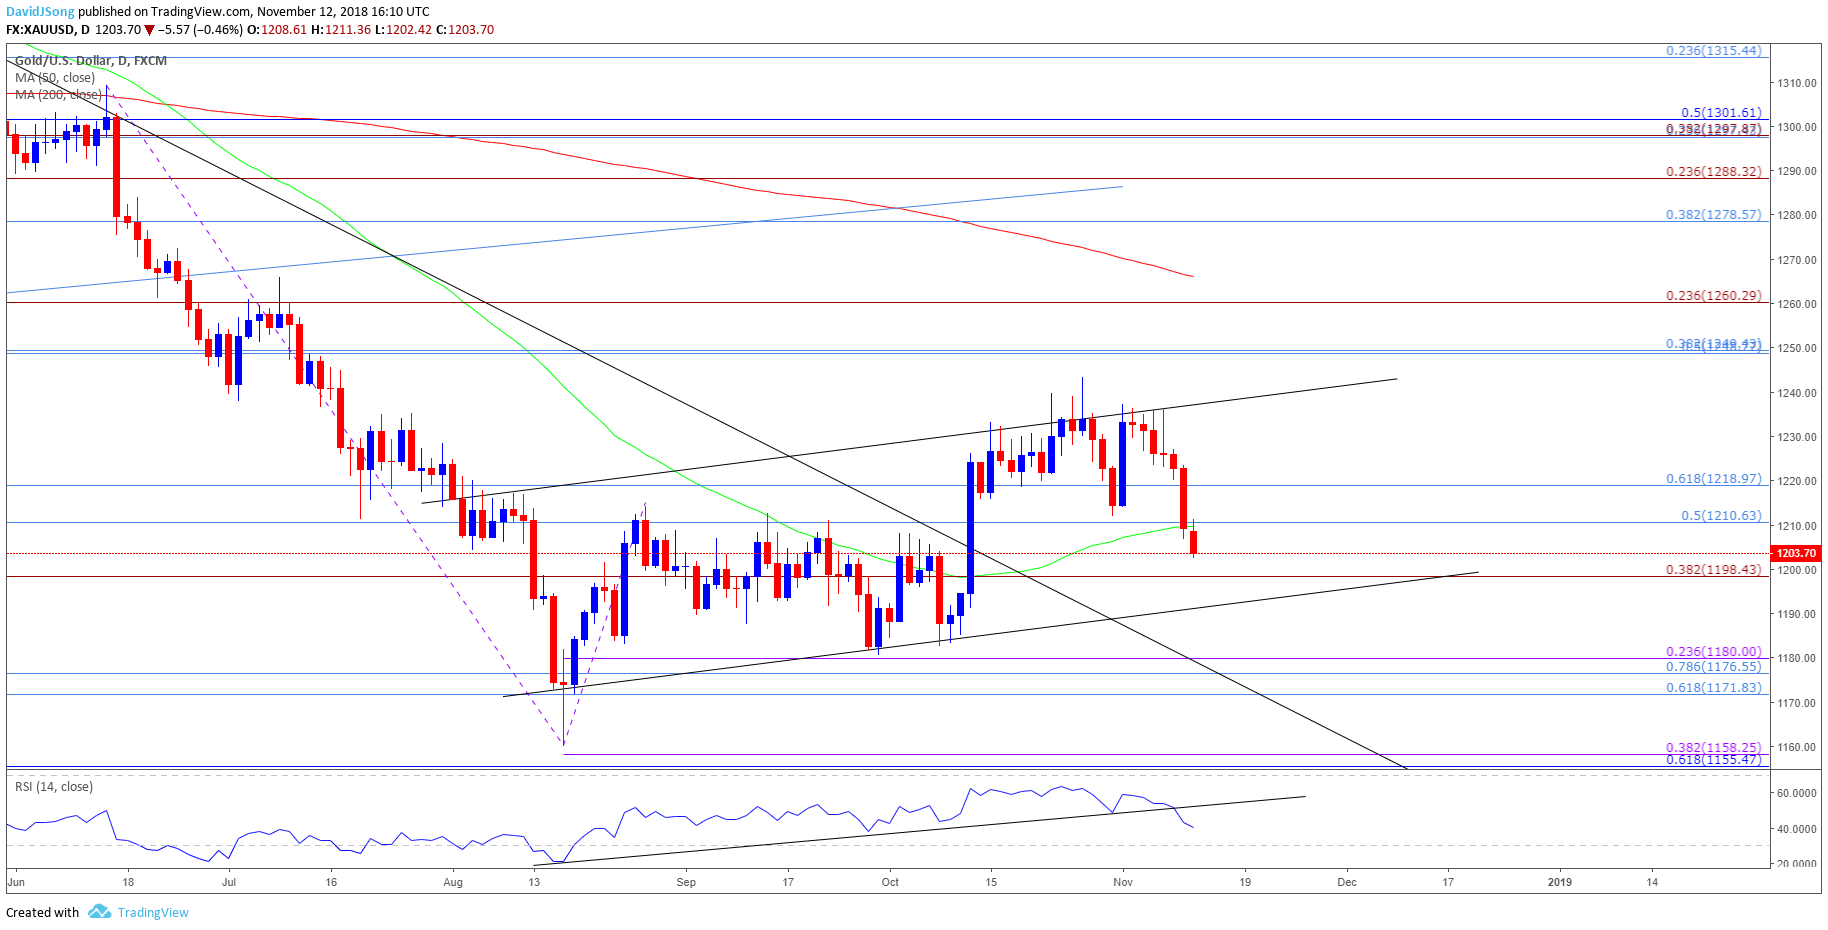 Image of gold daily chart